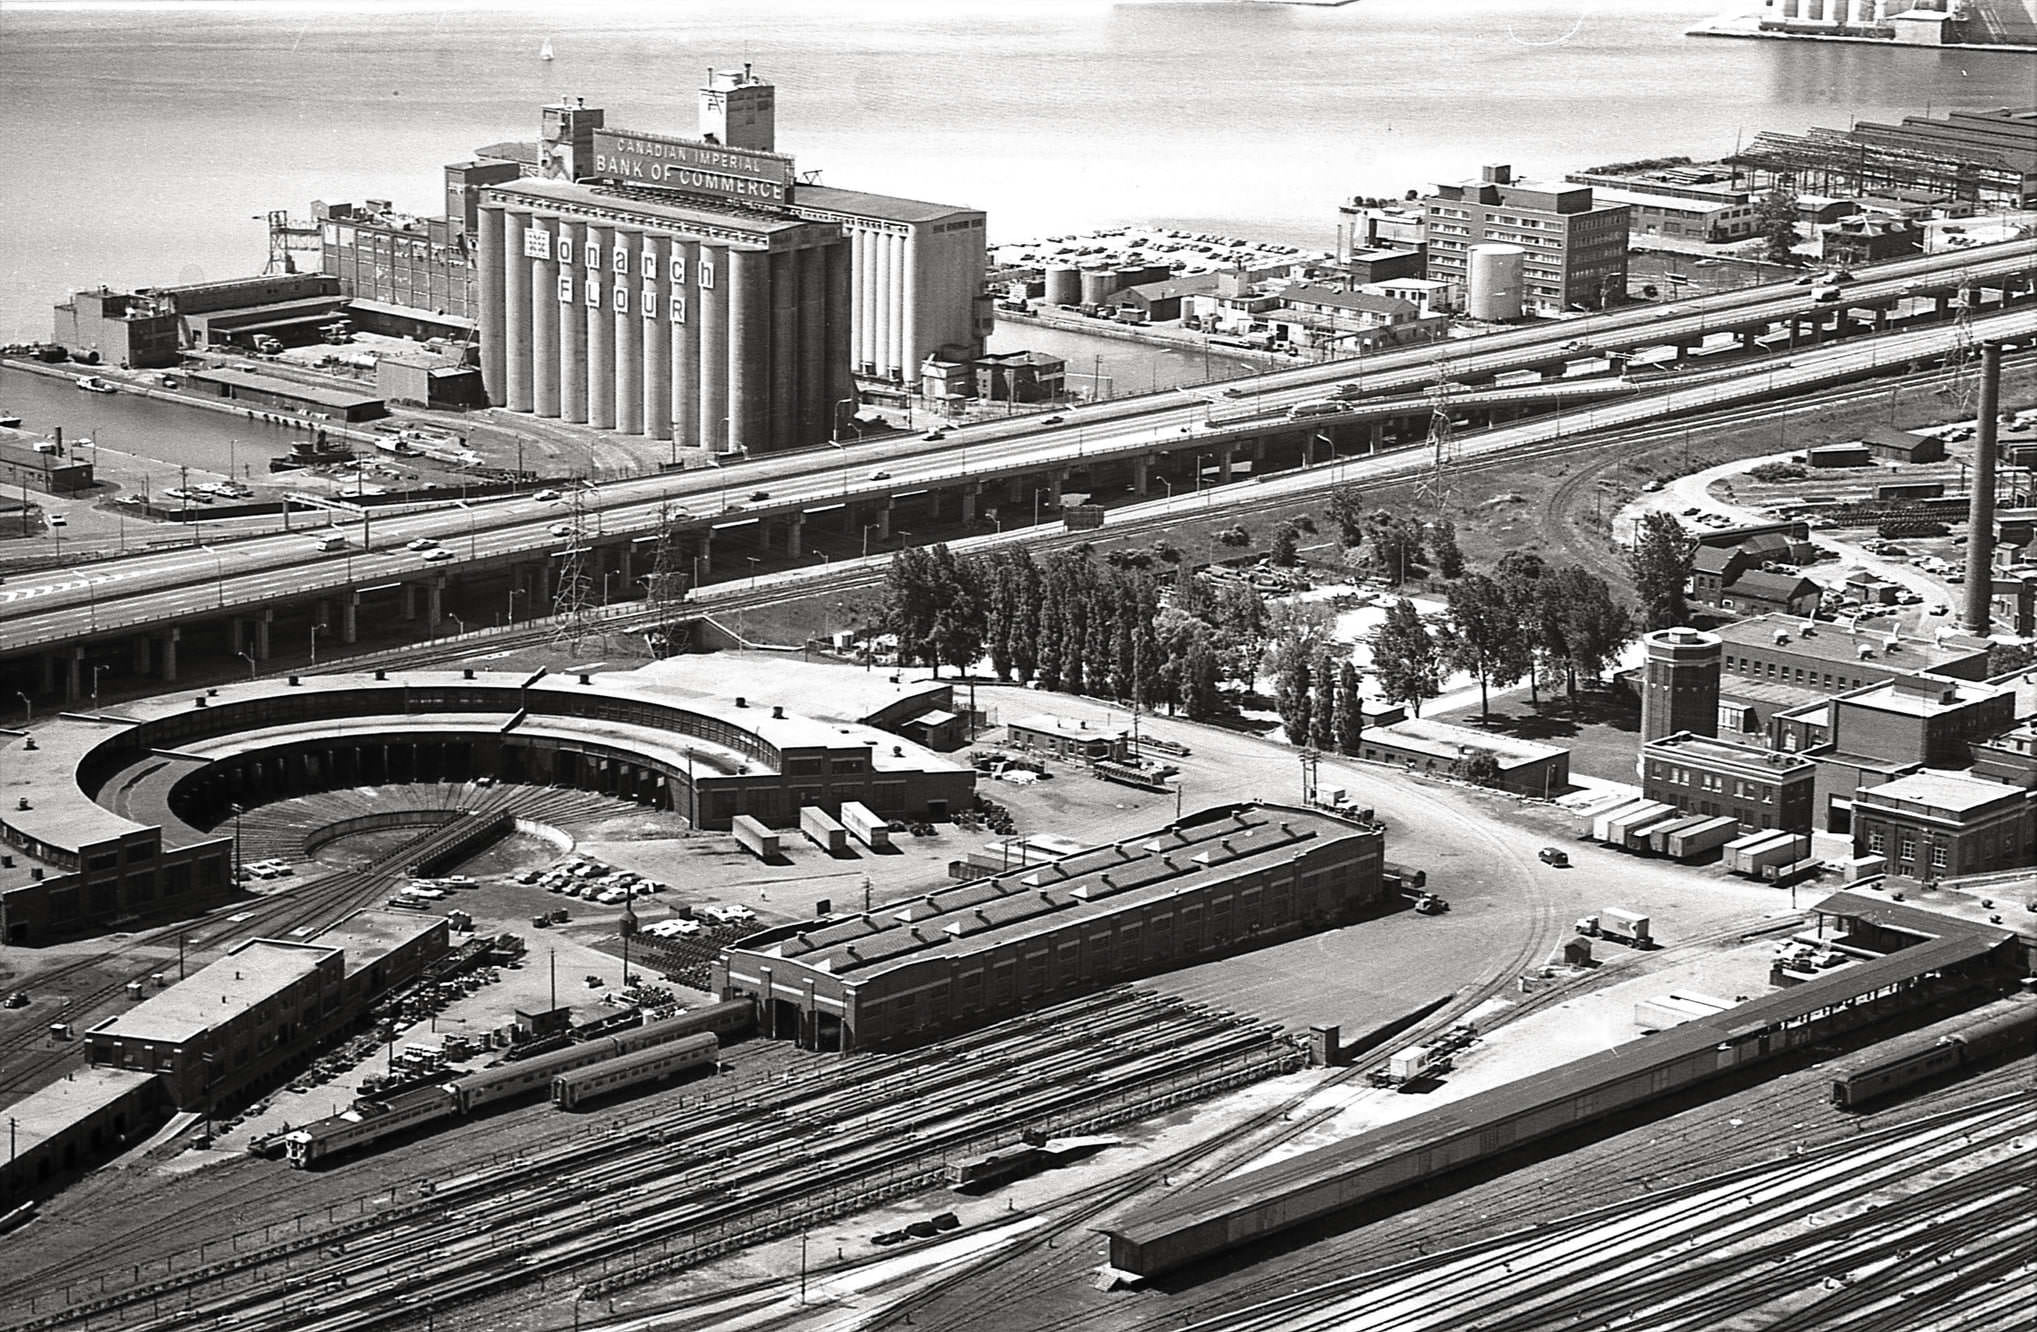 One for the railfans. John Street Roundhouse, late 1960s